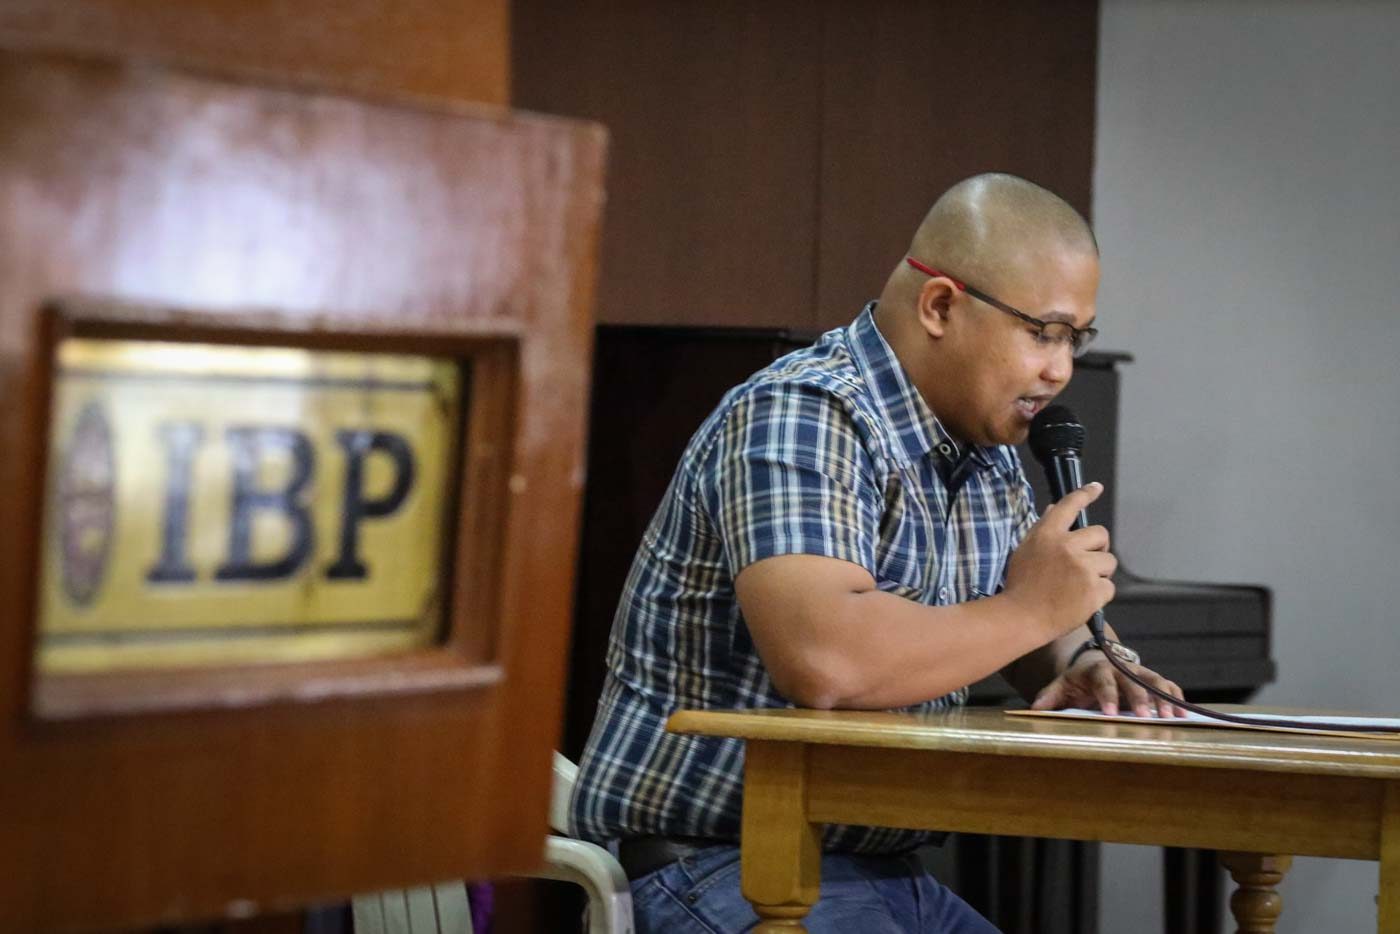 FIRST APPEARANCE. Peter Joemel Advincula aka Bikoy, the hooded man behind the controversial videos linking President Duterte's family to drugs, surfaces at the Integrated Bar of the Philippines on May 6, 2019. Photo by Jire Carreon/Rappler